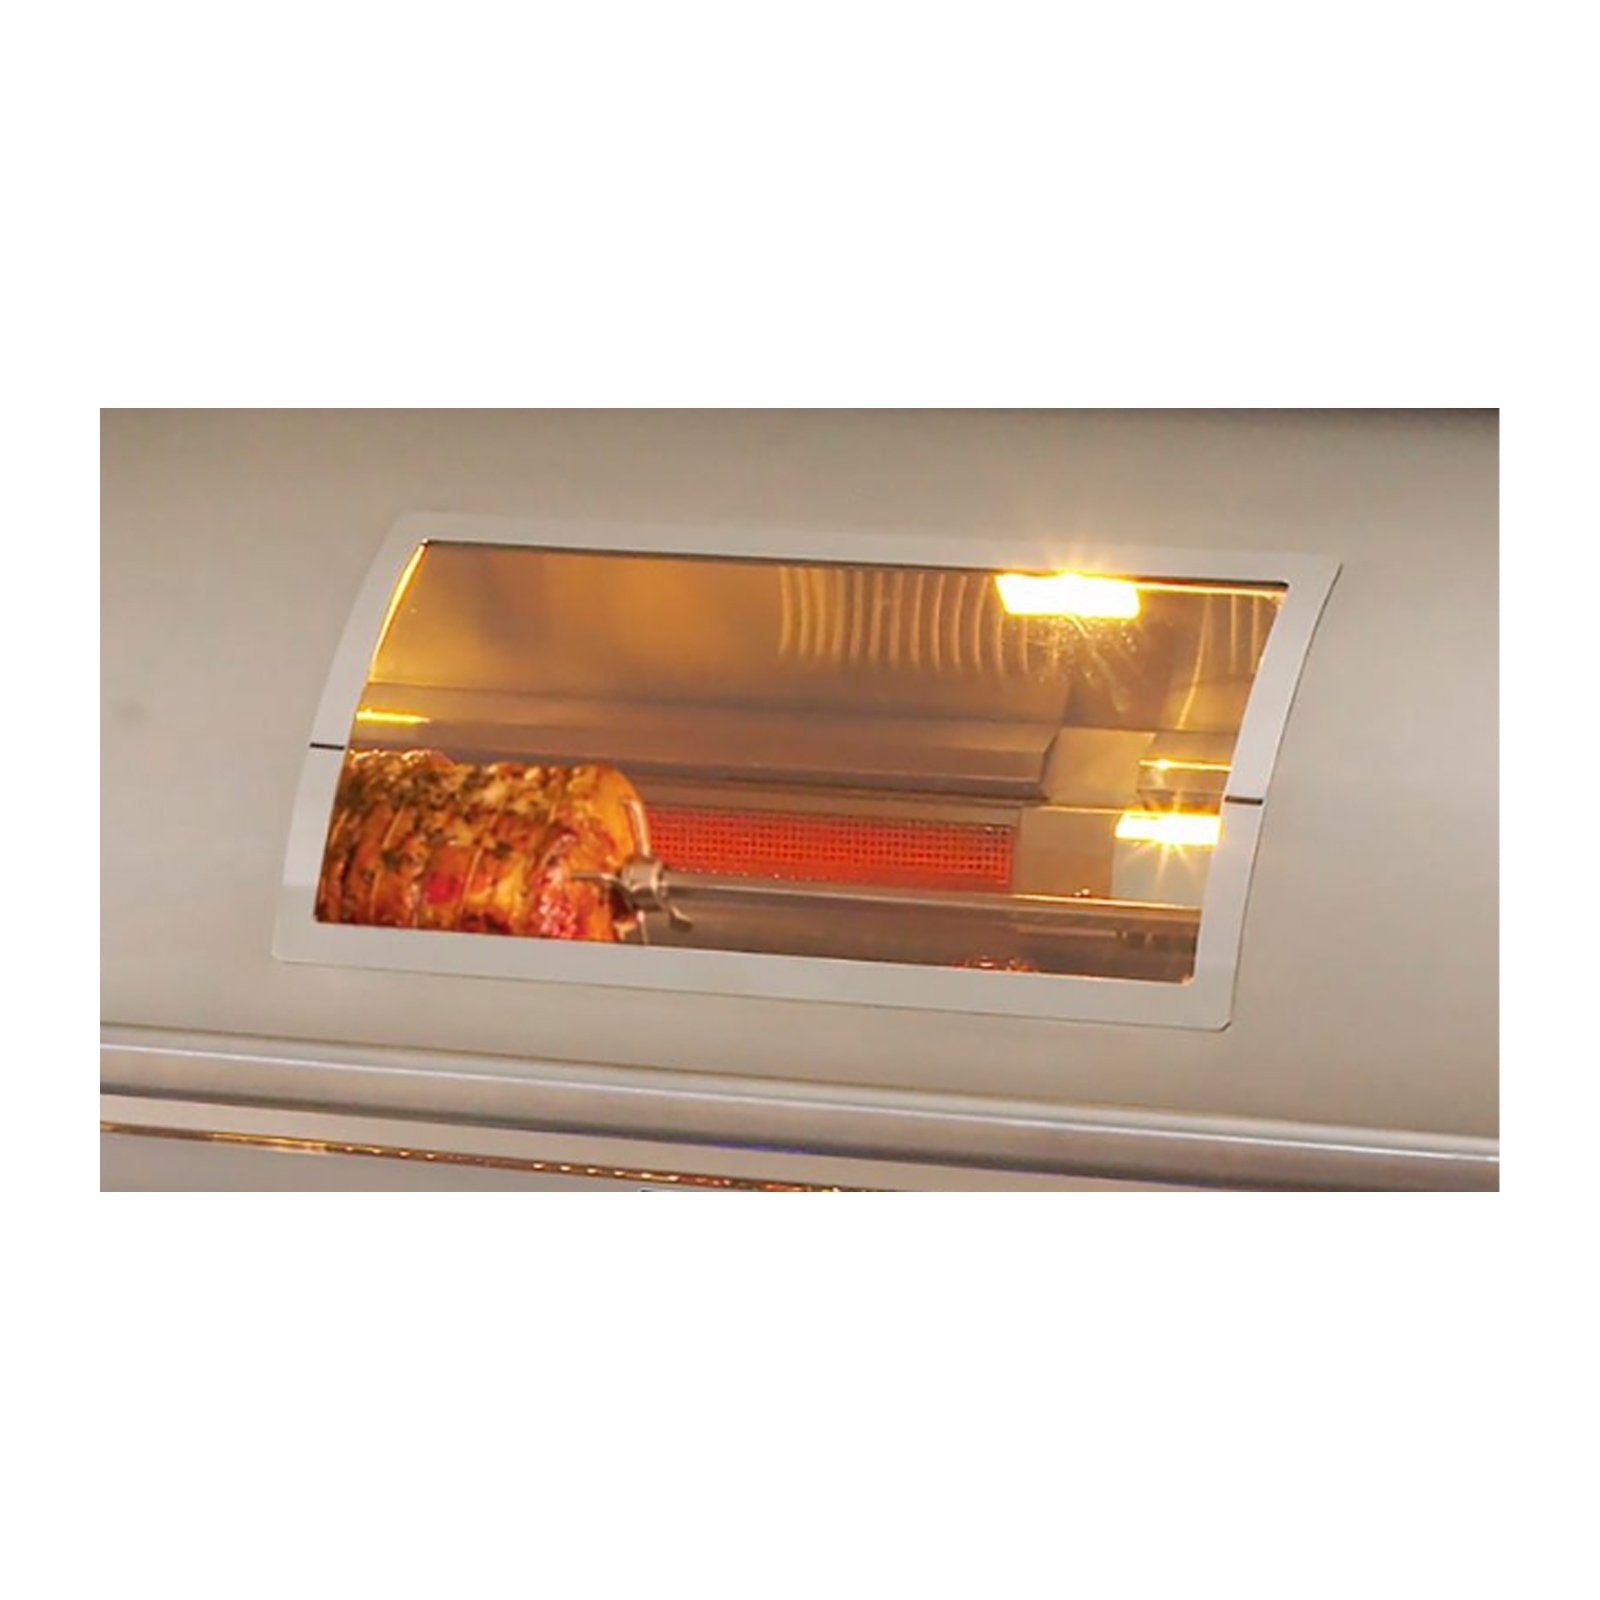 fire-magic-30-a660i-built-in-grill-w-infra-burner-rotiss-analog-display 10